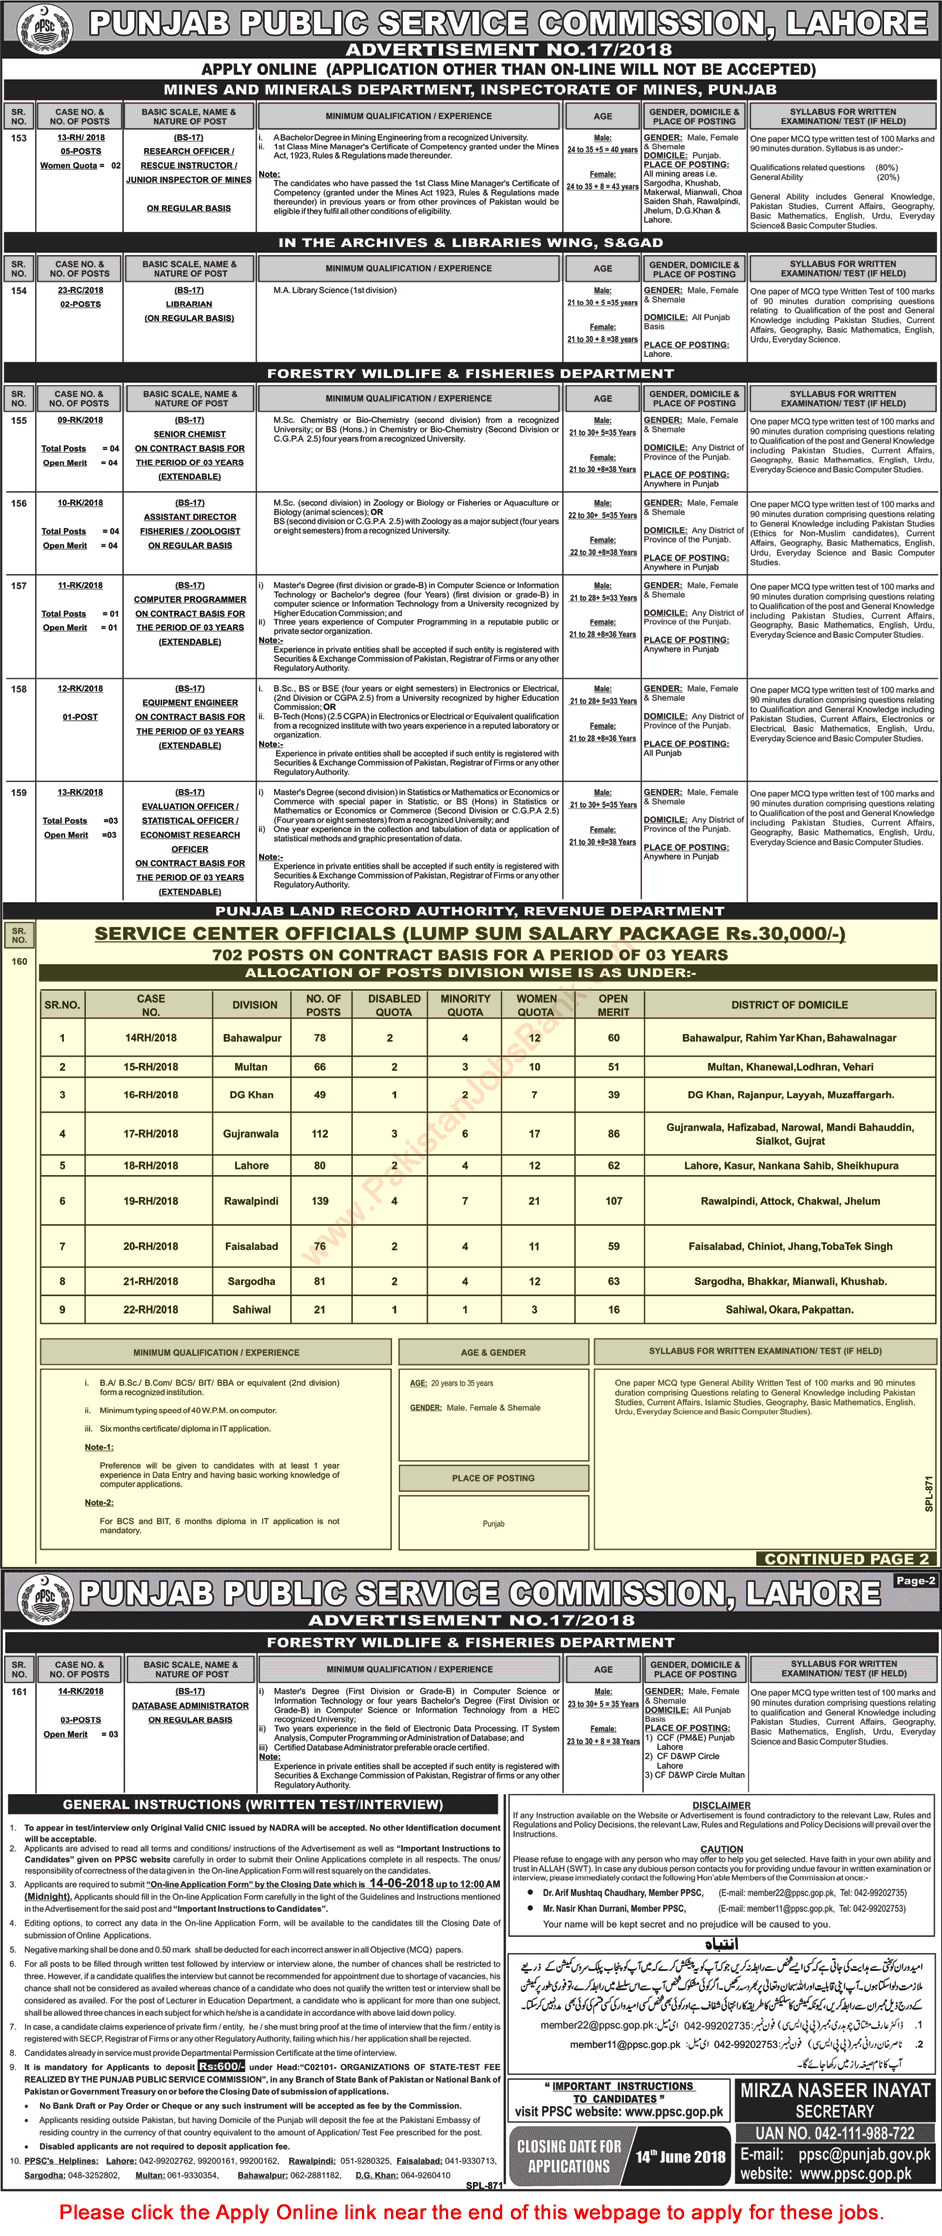 Service Center Officials Jobs in Punjab Land Record Authority 2018 May / June PPSC Apply Online Latest